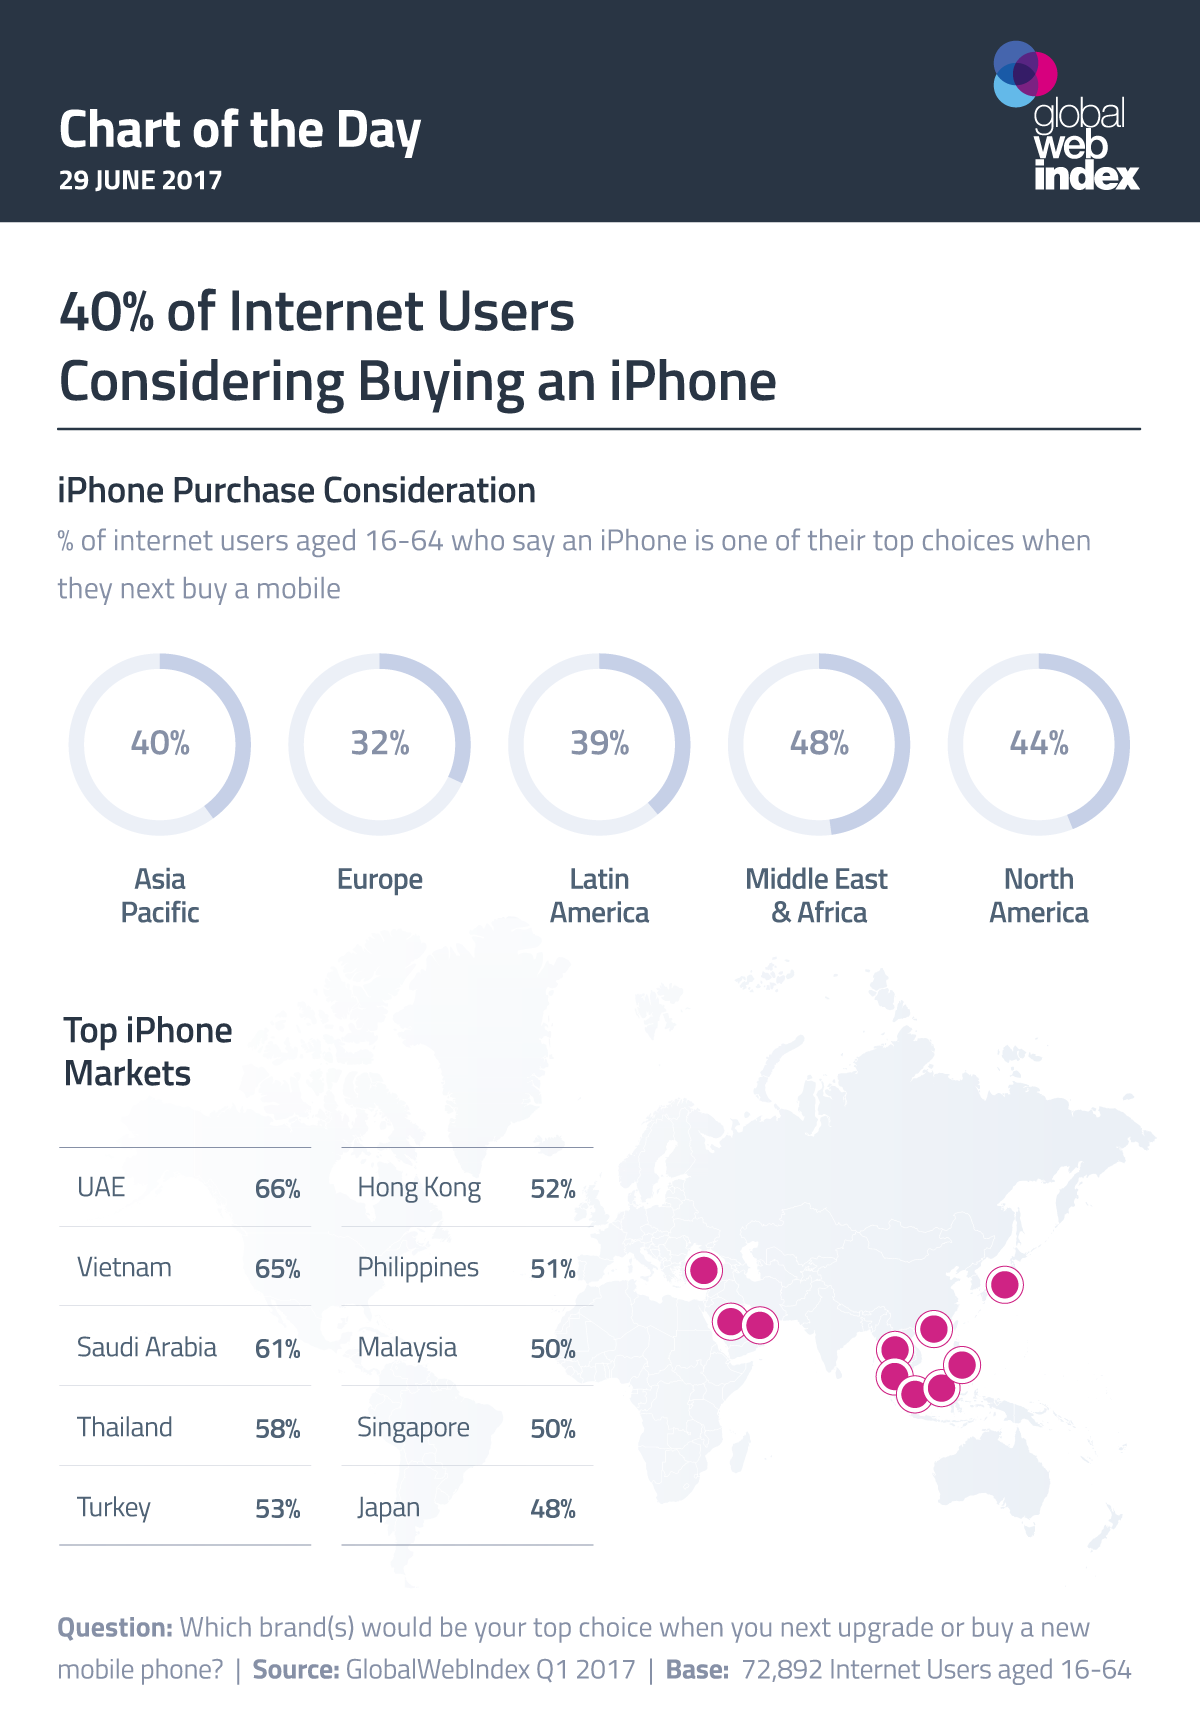 40% of Internet Users Considering Buying an iPhone